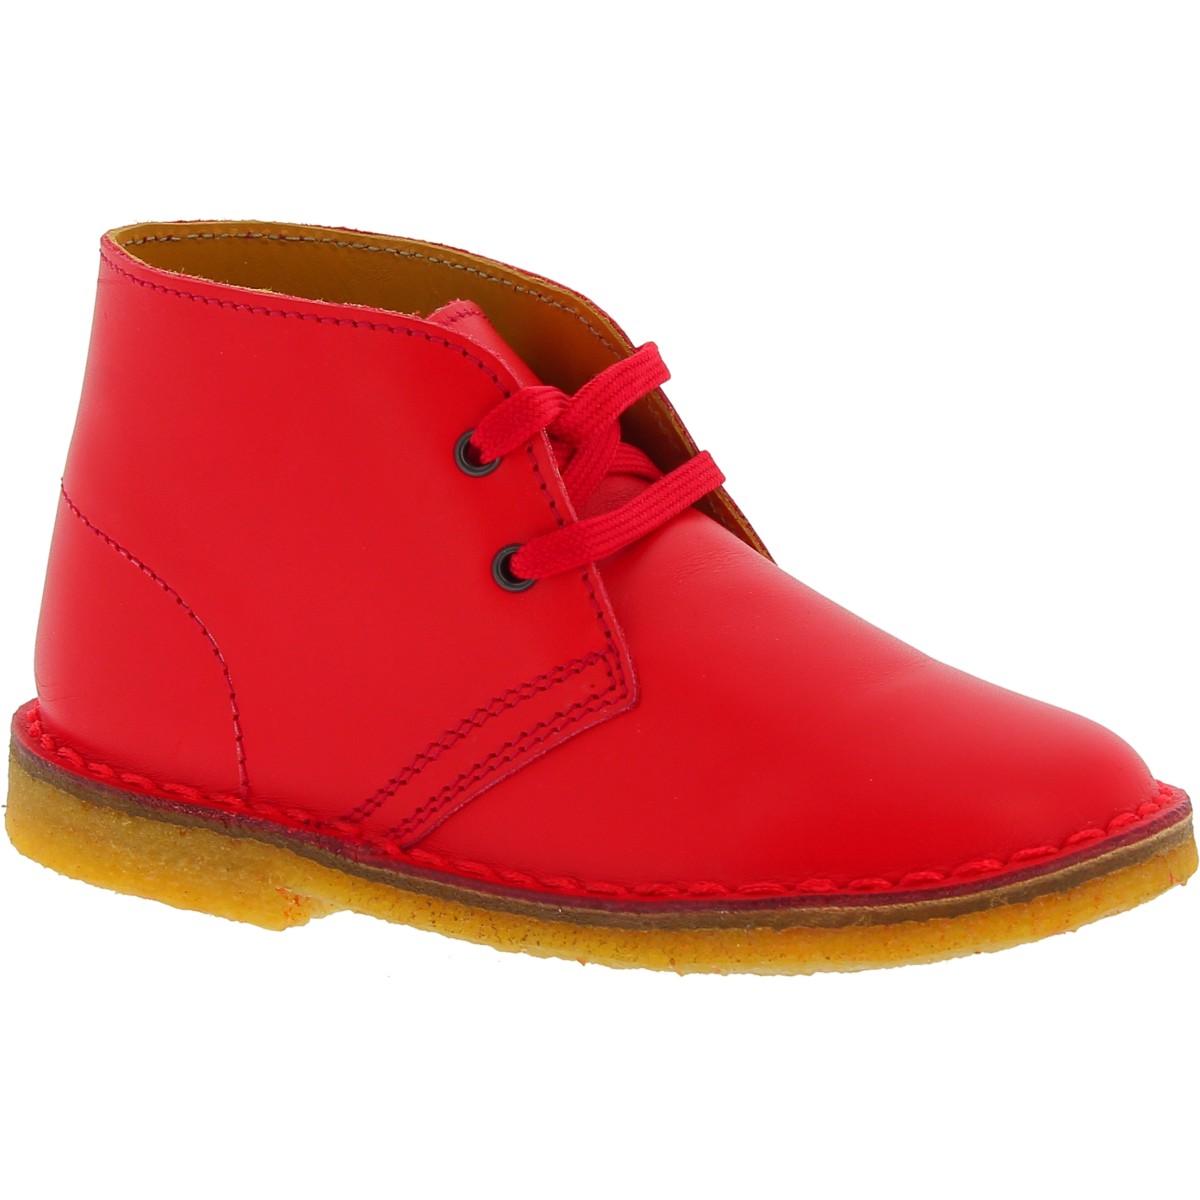 girls and boy's chukka boots in red handmade in Italy The leather craftsmen